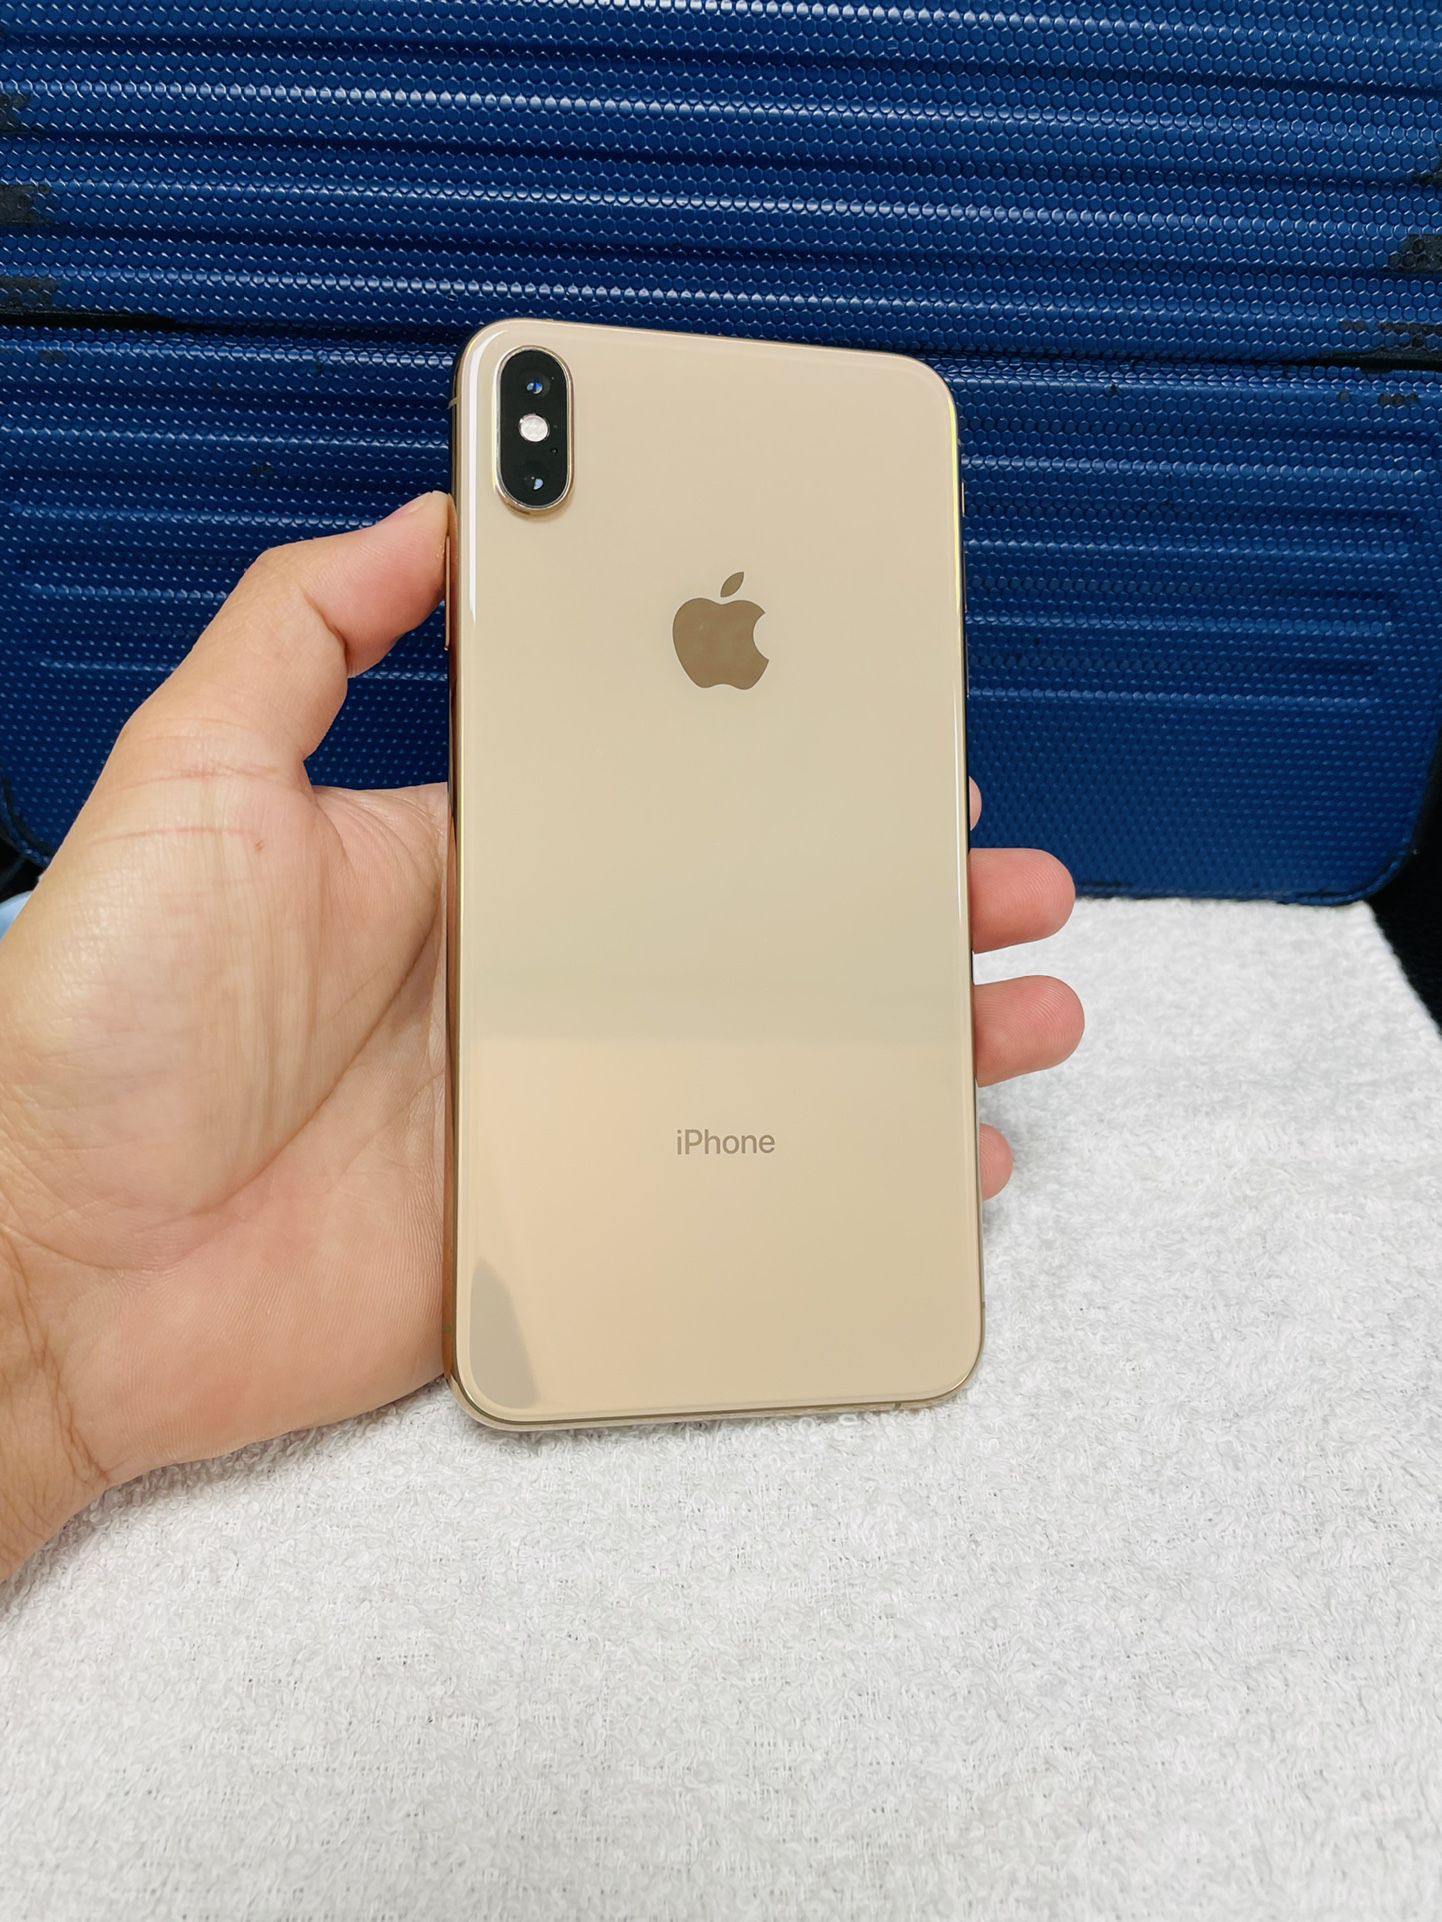 iPhone Xs Max Gold 256GB unlocked to Any carrier, Perfect Condition, Everything Works Great Less Face ID 